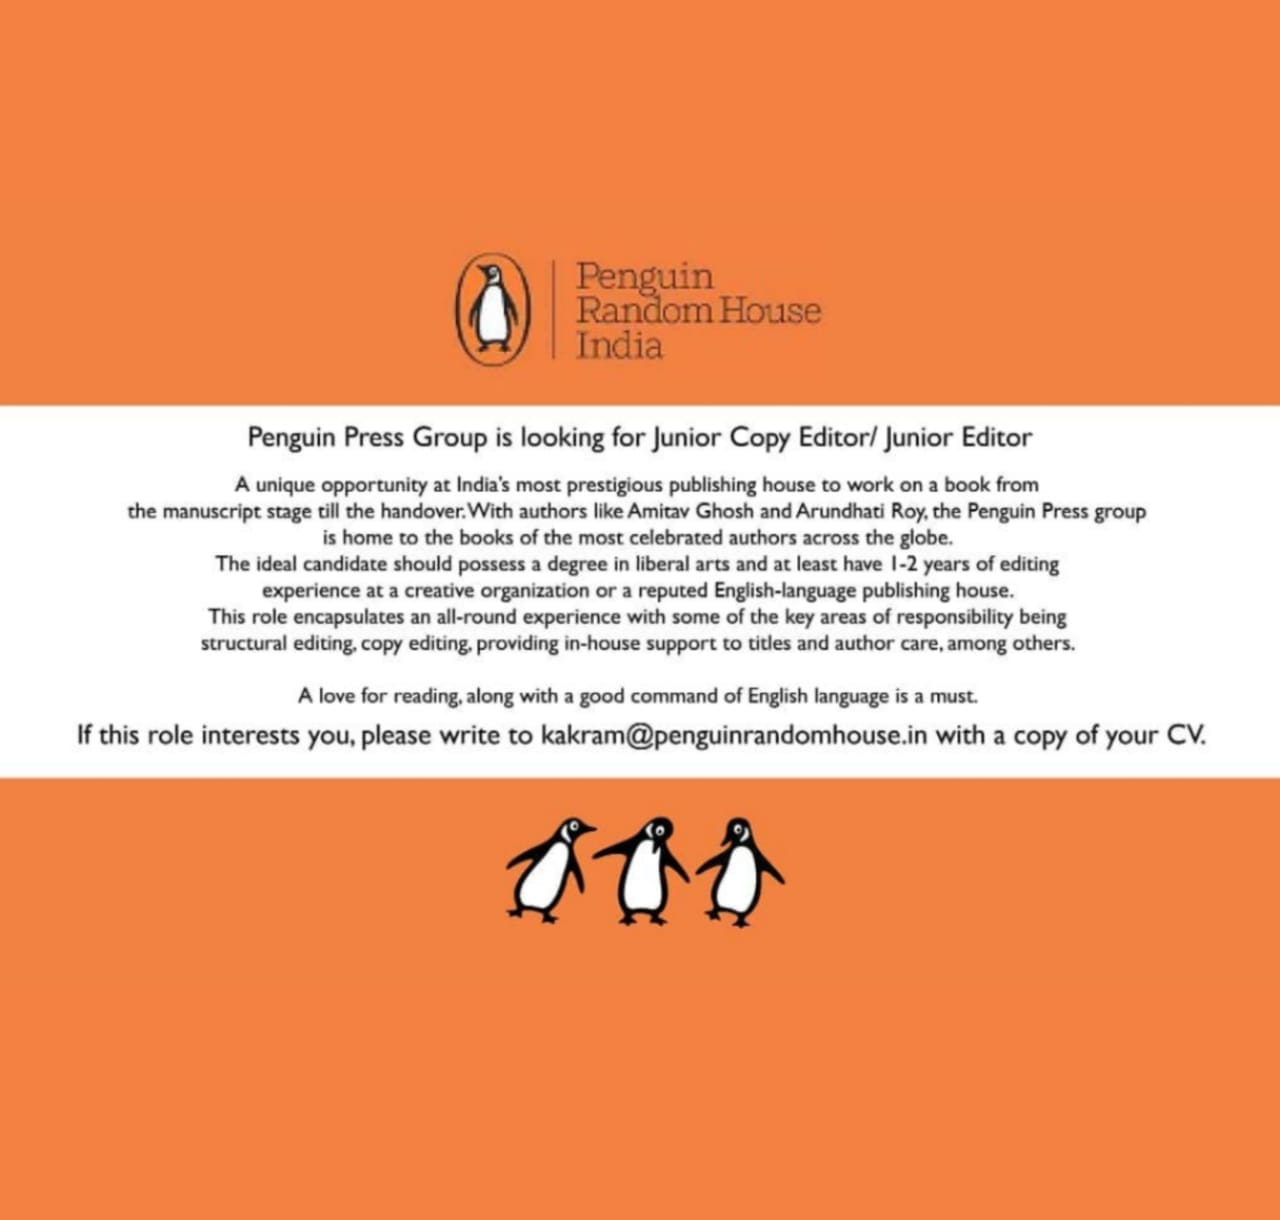 May be an image of text that says 'Penguin RandomHou India Penguin Group looking for Junior Copy Editor/ Junior Editor unique opportunity India's most prestigious publishing house work on book from the manuscript stage till authors Amitav Ghosh Arundhati Penguin Press group home books most authors globe. The ideal candidate should possess degree liberal have| years editing experience creative organization a reputed publishing house. This encapsulates all-round experiend with areas responsibility being structural editing, editing, providing in-house support titles and author e,among others. love for reading. along with good command English language isa must. role interests you, please to kakram@penguinrandomhouse.in with copy of your'